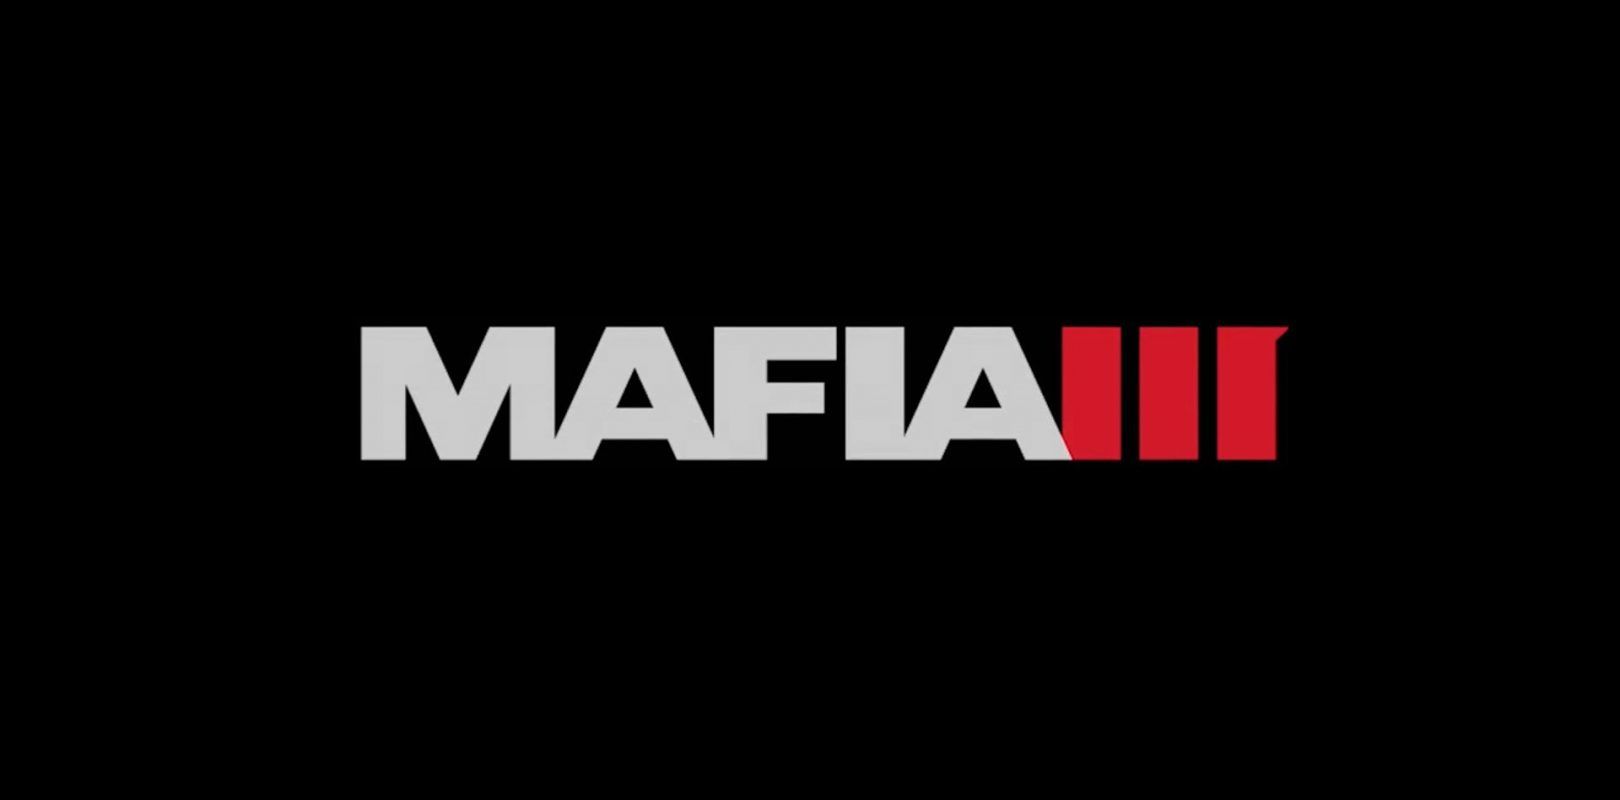 Is A New Mafia Project In The Works?